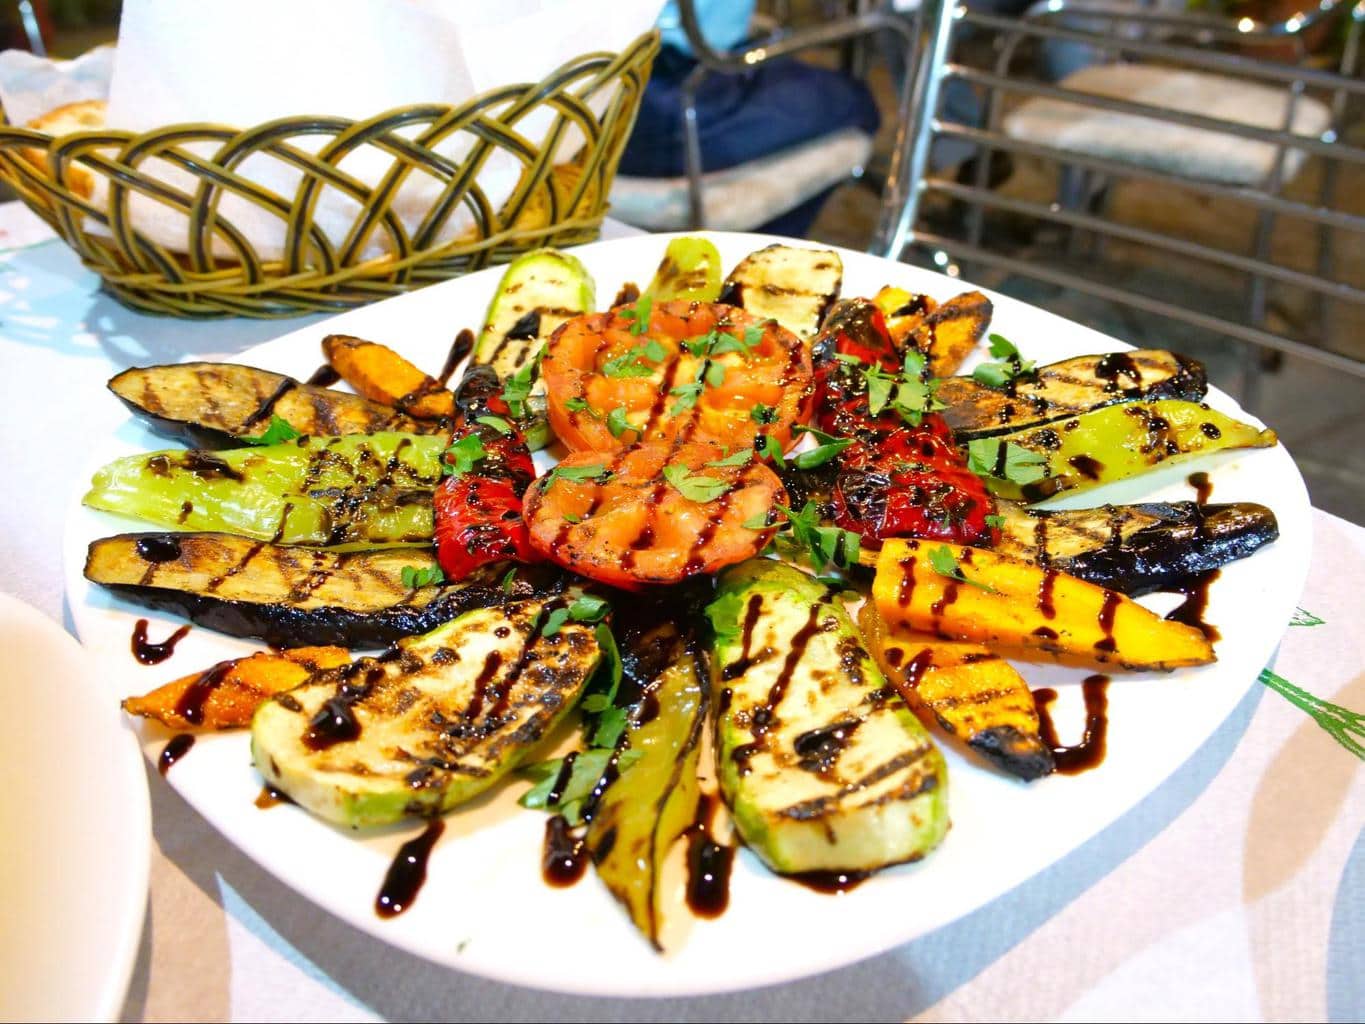 Perime në Zgarë, grilled vegetables with balsamic vinegar